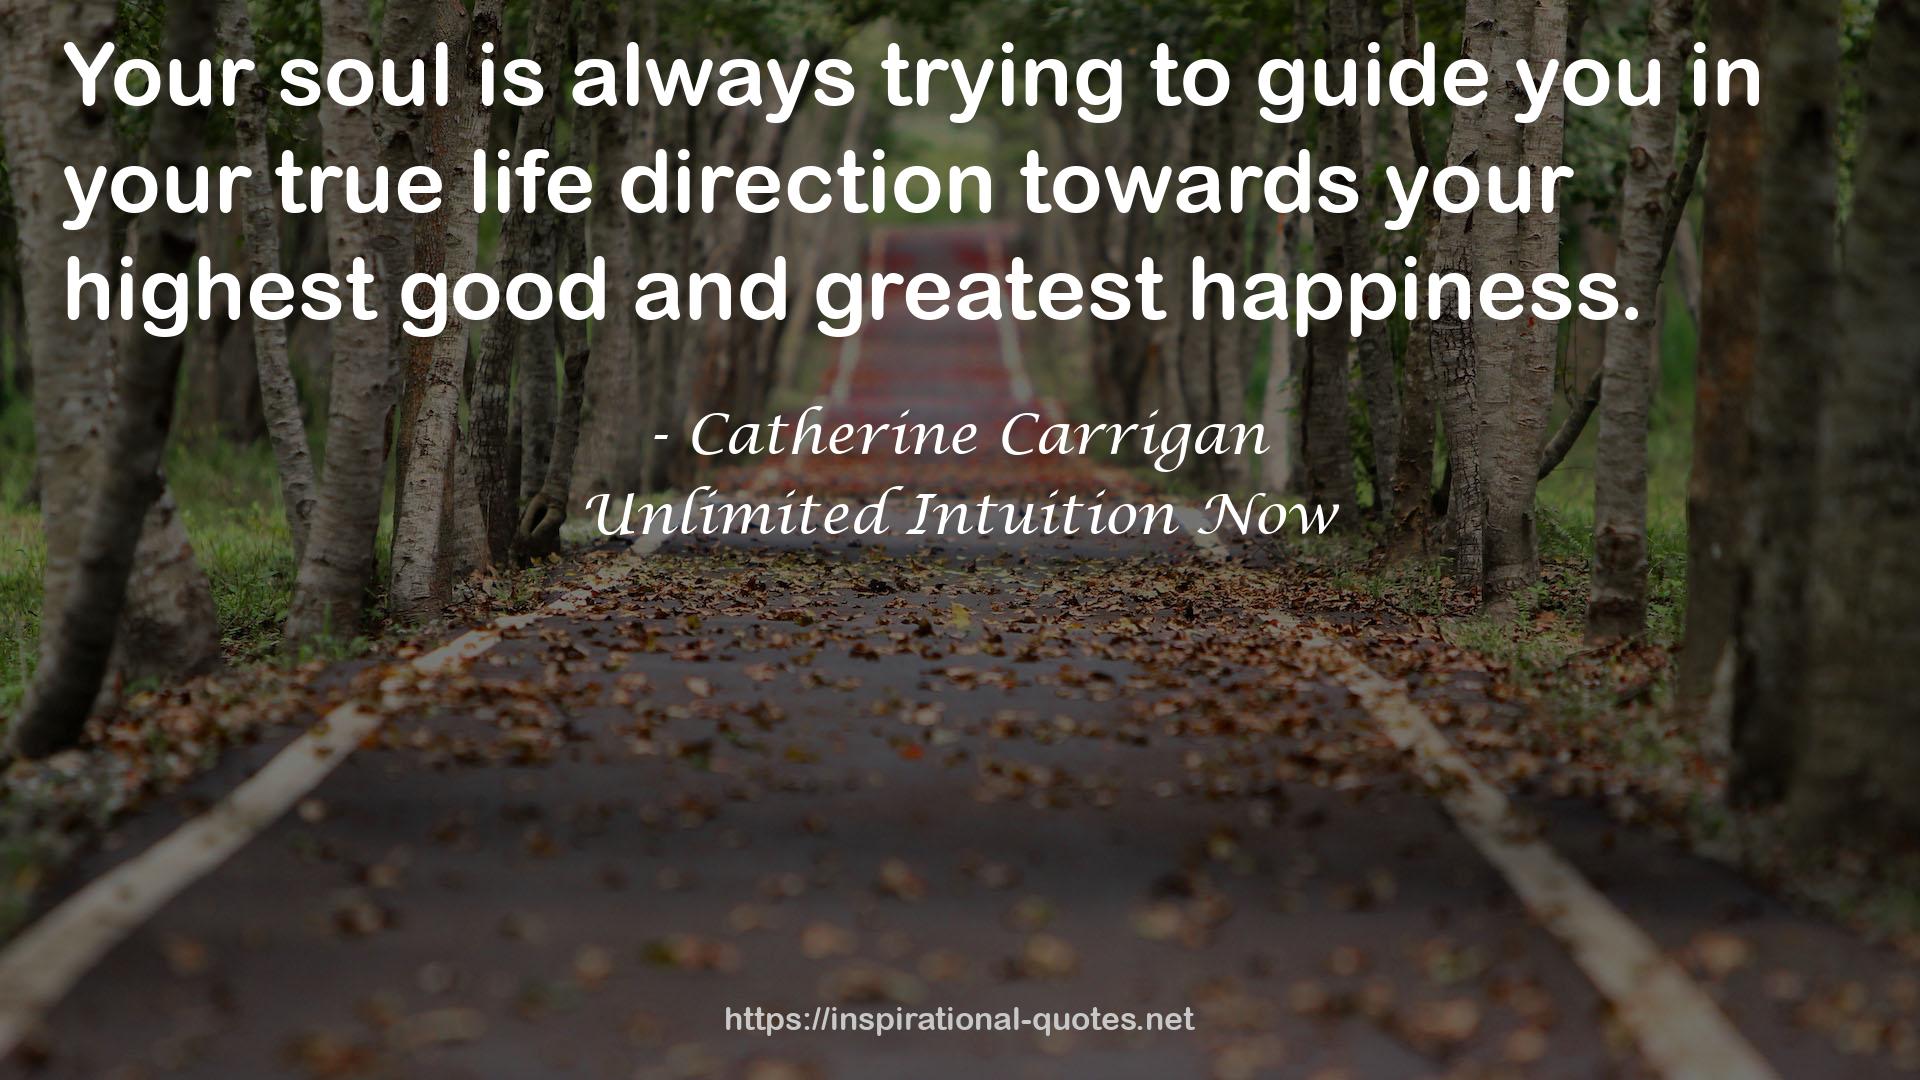 Unlimited Intuition Now QUOTES